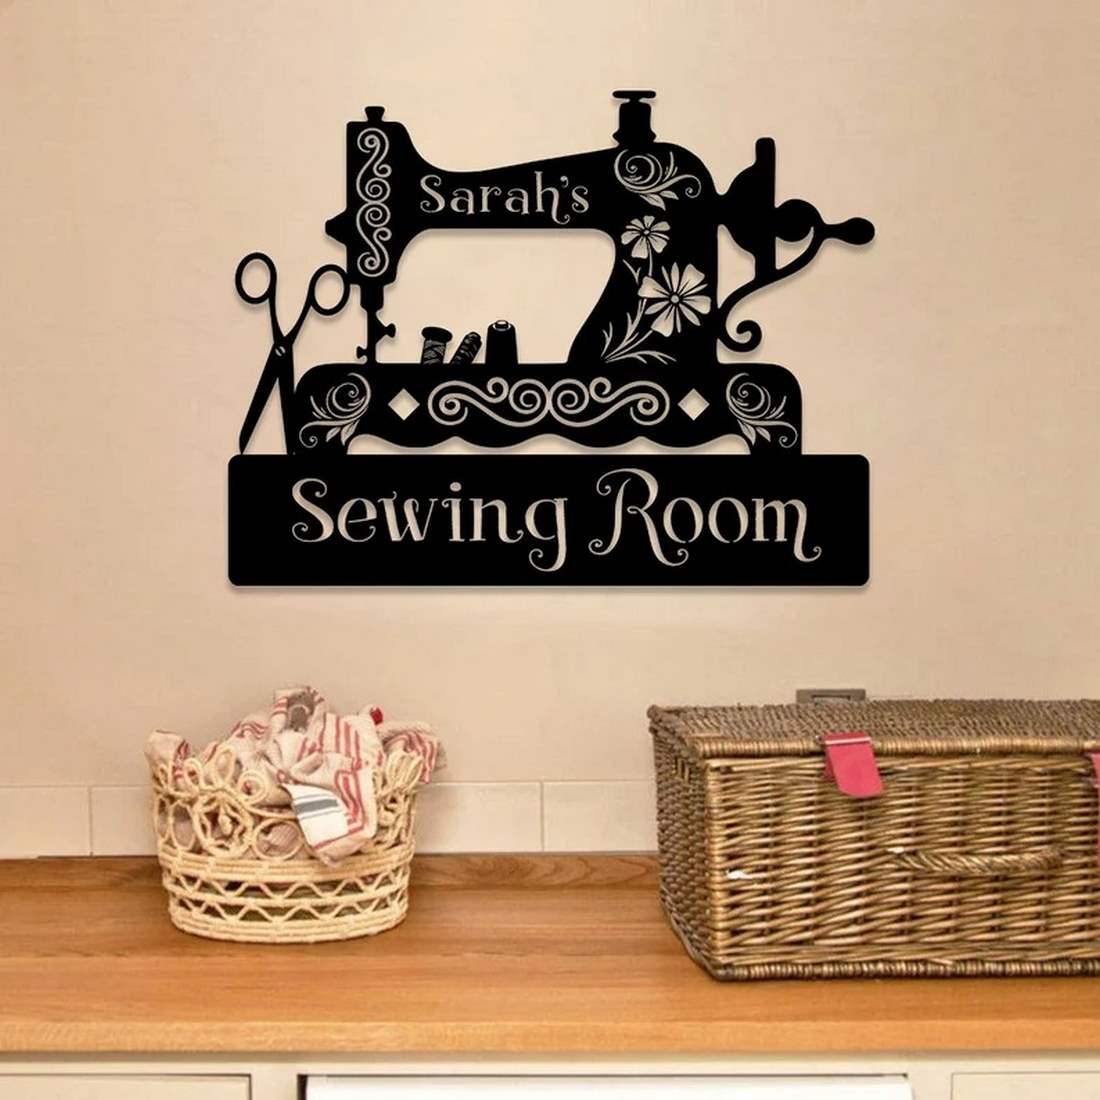 Dino zozo on LinkedIn: Sewing Room Decor How to Create a Beautiful and  Functional Craft Room – 7…